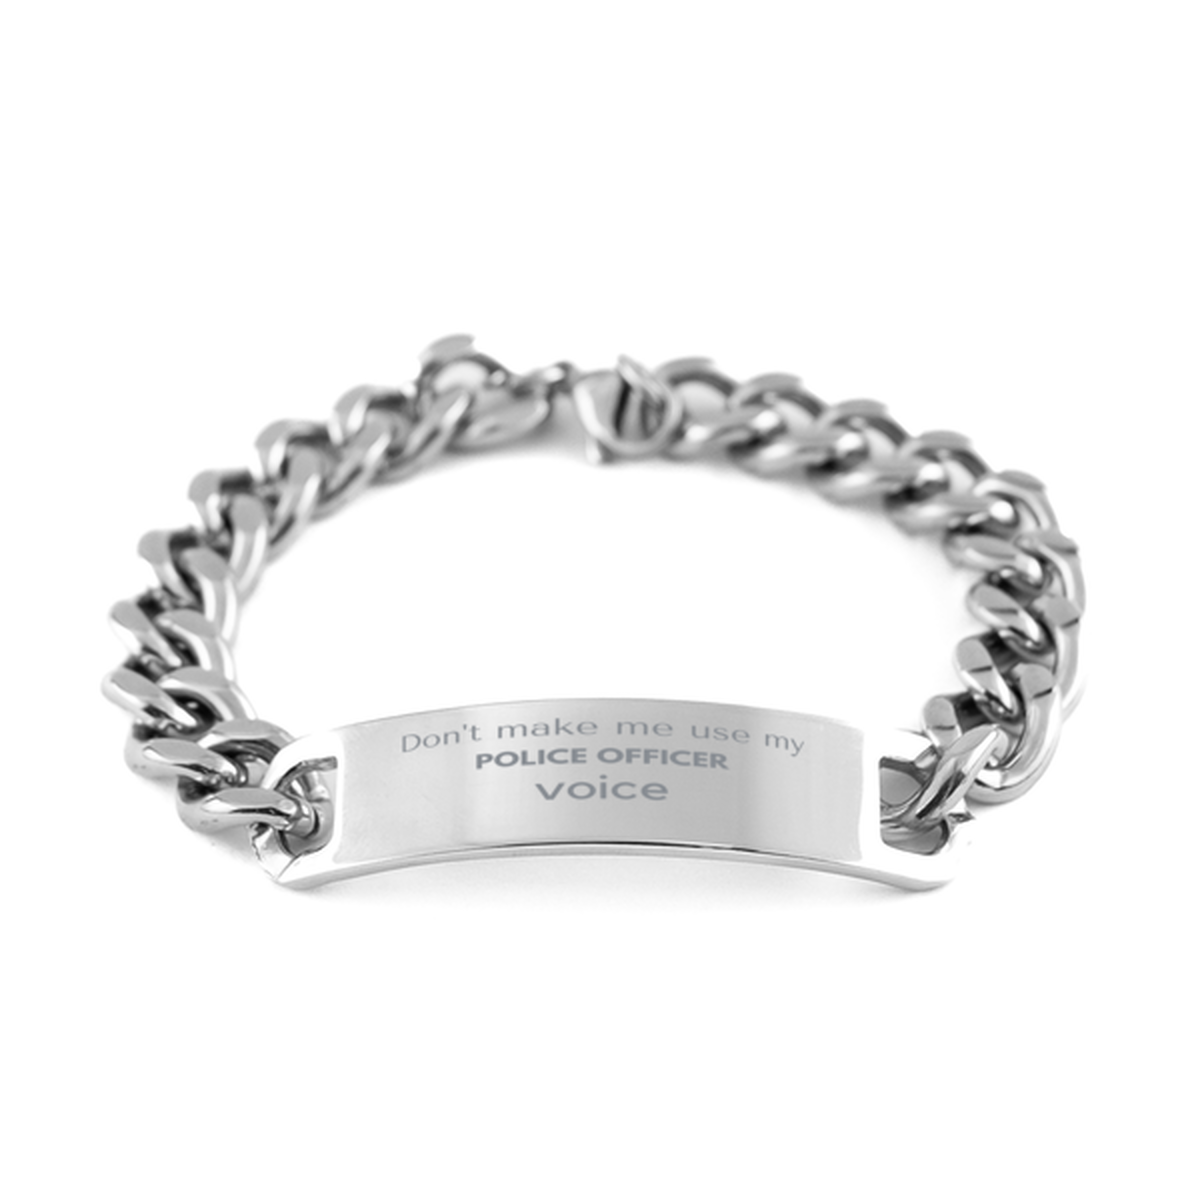 Don't make me use my Police Officer voice, Sarcasm Police Officer Gifts, Christmas Police Officer Cuban Chain Stainless Steel Bracelet Birthday Unique Gifts For Police Officer Coworkers, Men, Women, Colleague, Friends